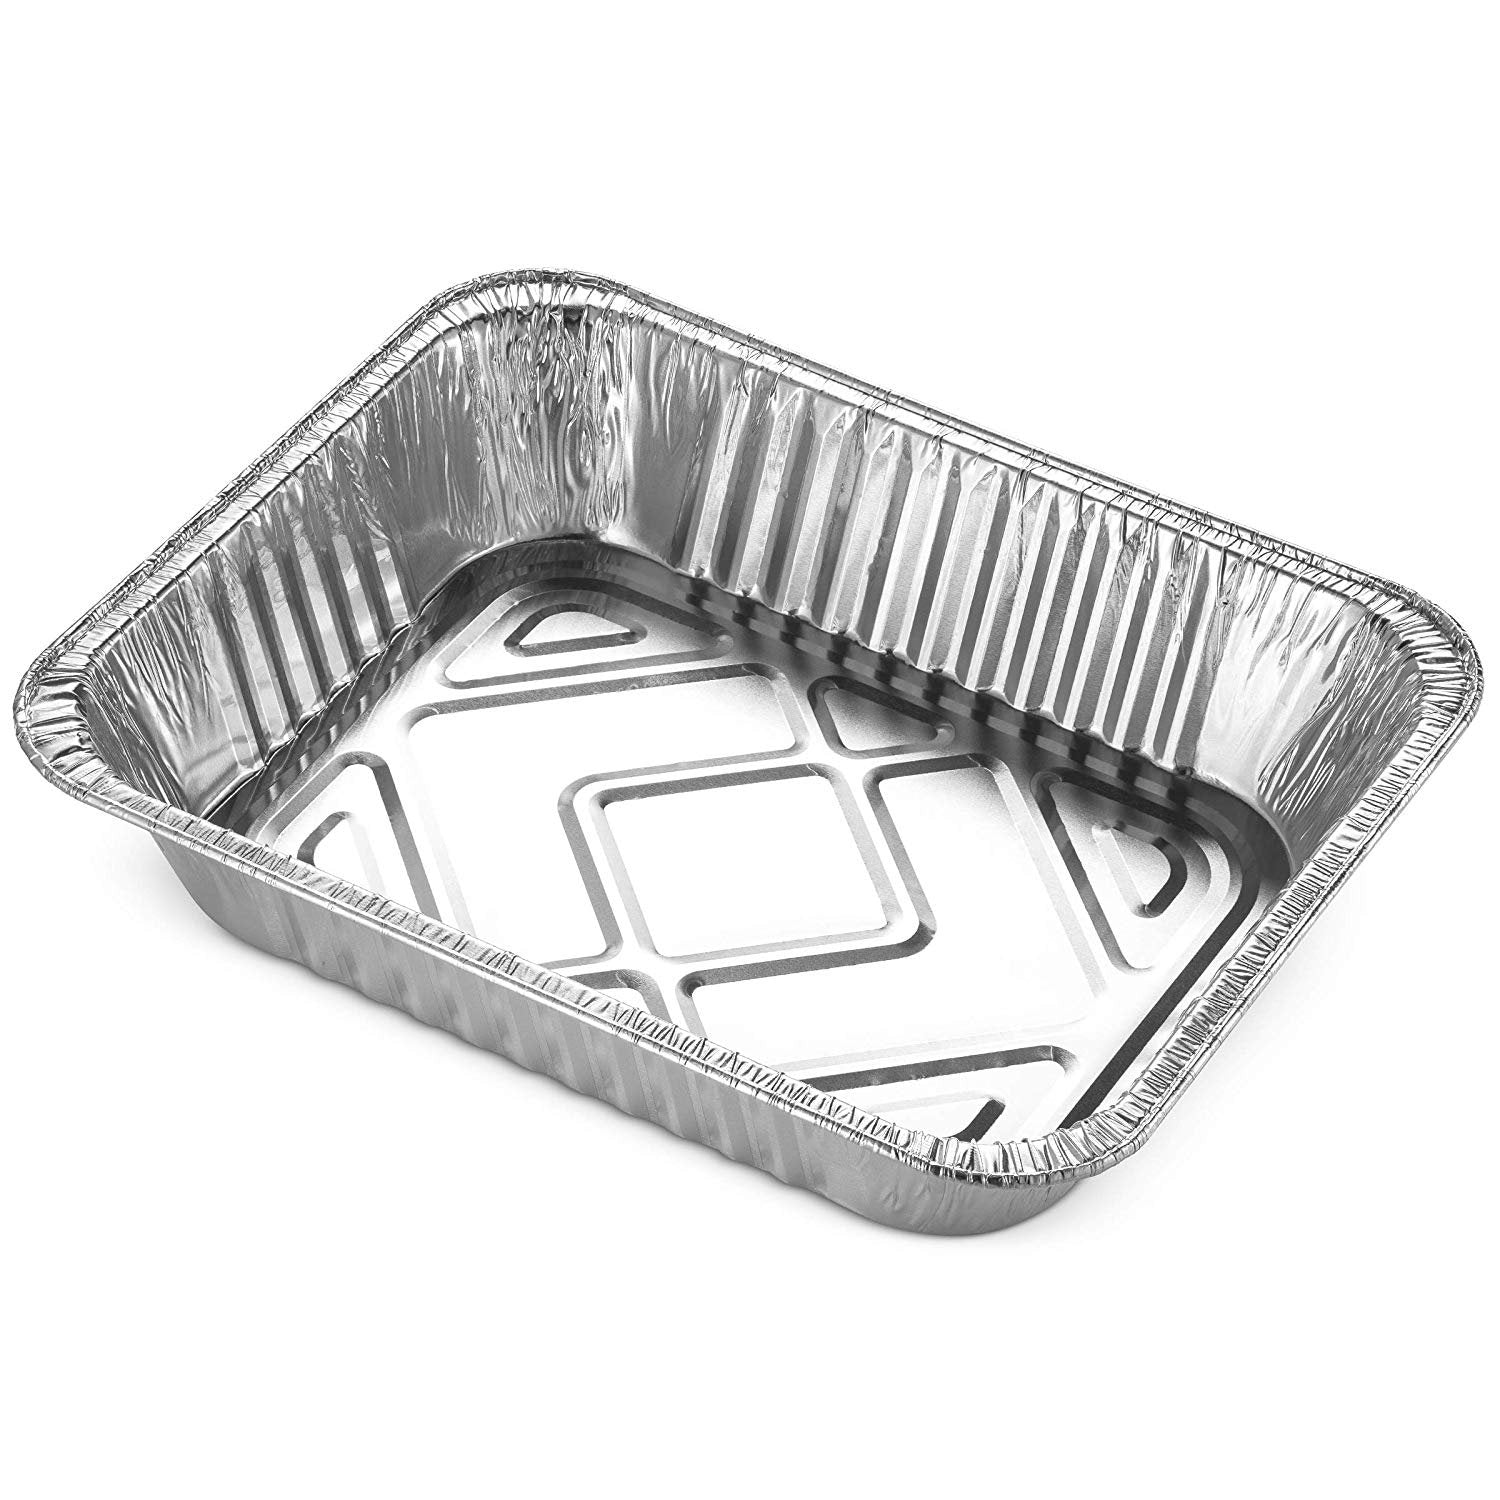 Stack Man 9x13 Disposable Aluminum Foil Pans 30 Pack Large Baking Pan Trays - Heavy Duty Tin Tray Half Size Chafing Dishes. Food Containers for